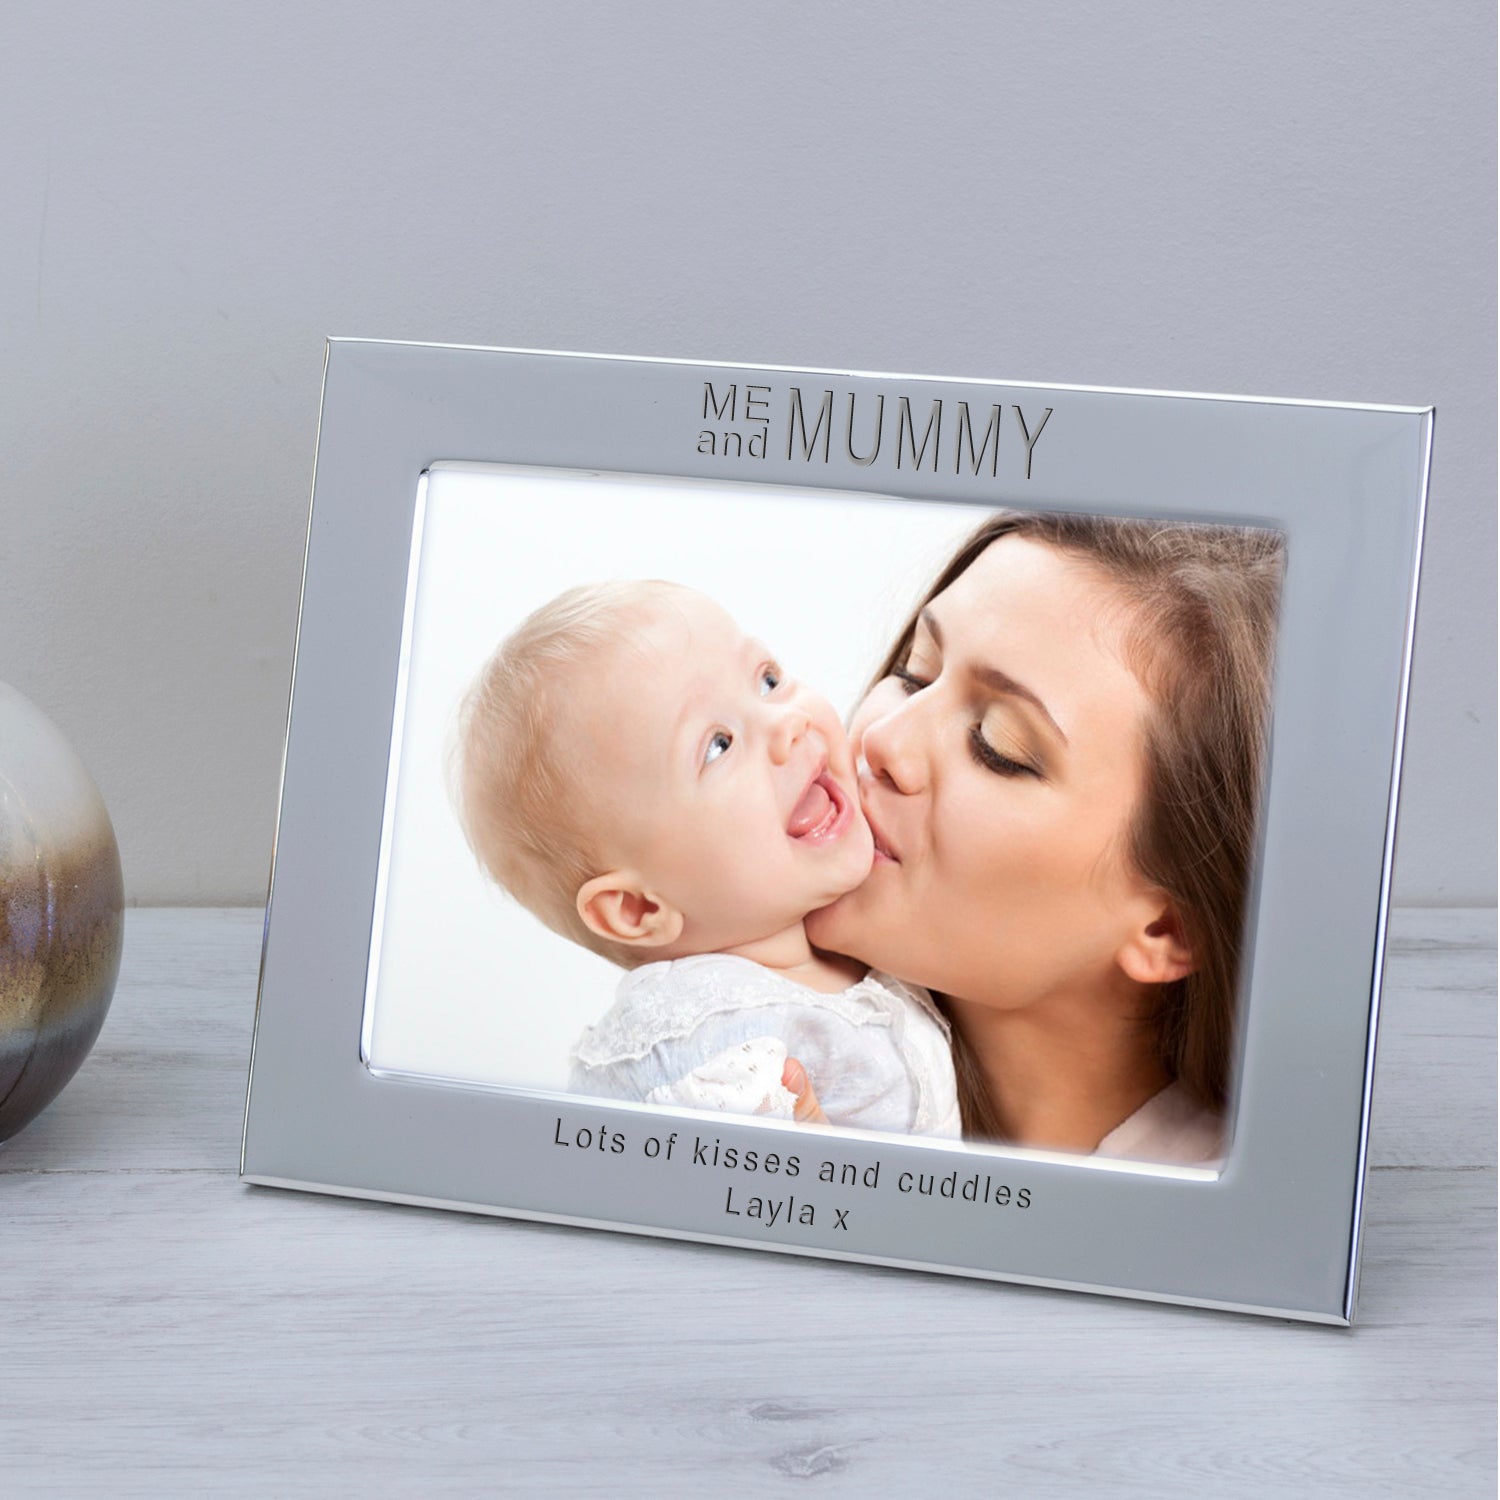 Personalised ME and MUMMY Silver Plated Photo Frame